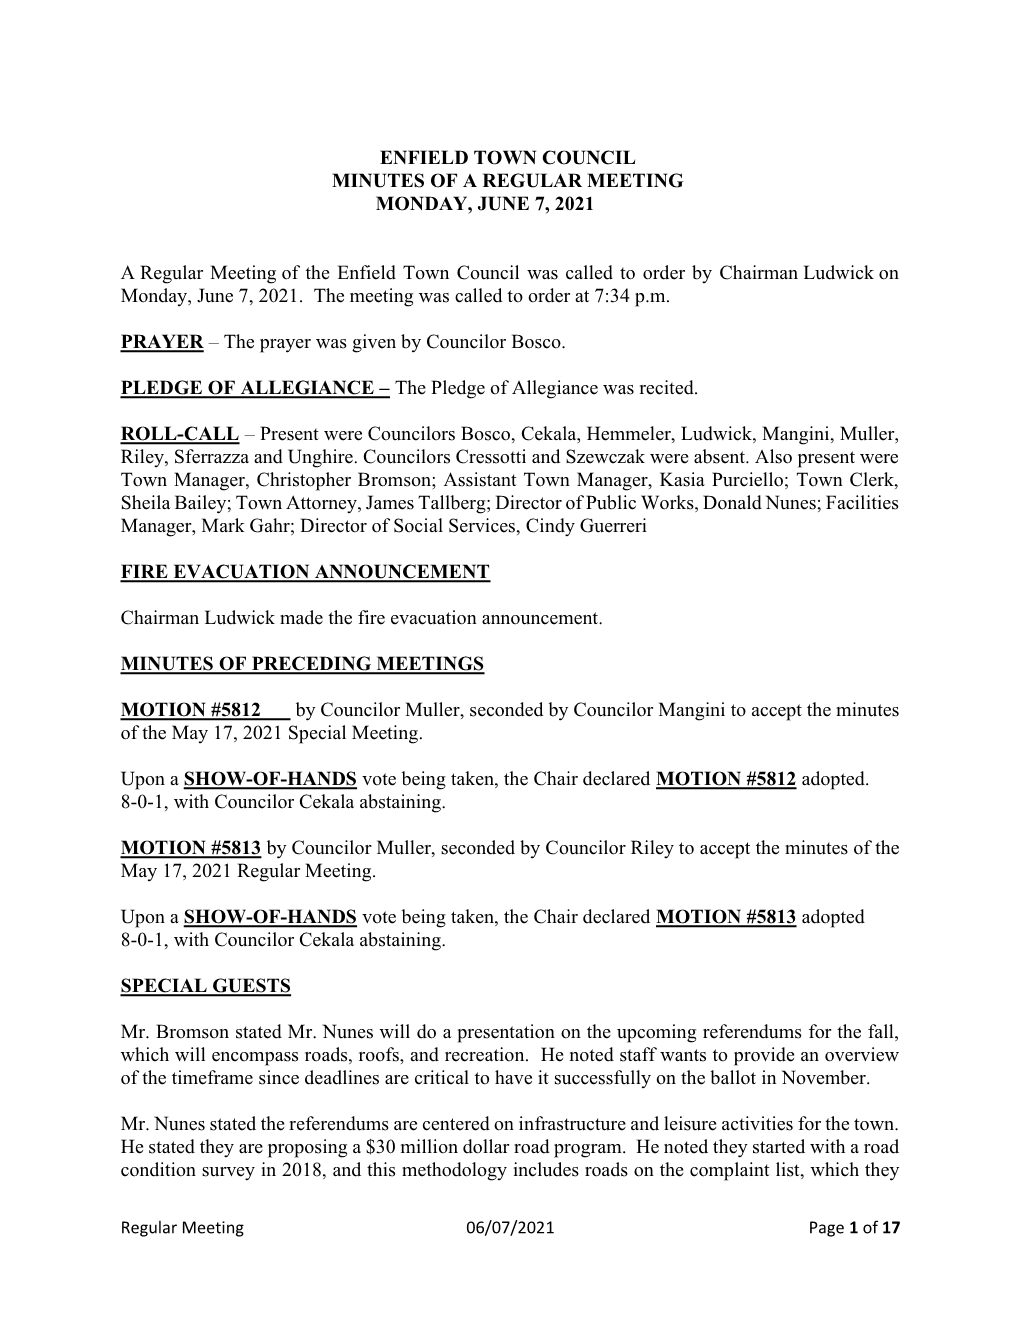 Enfield Town Council Minutes of a Regular Meeting Monday, June 7, 2021